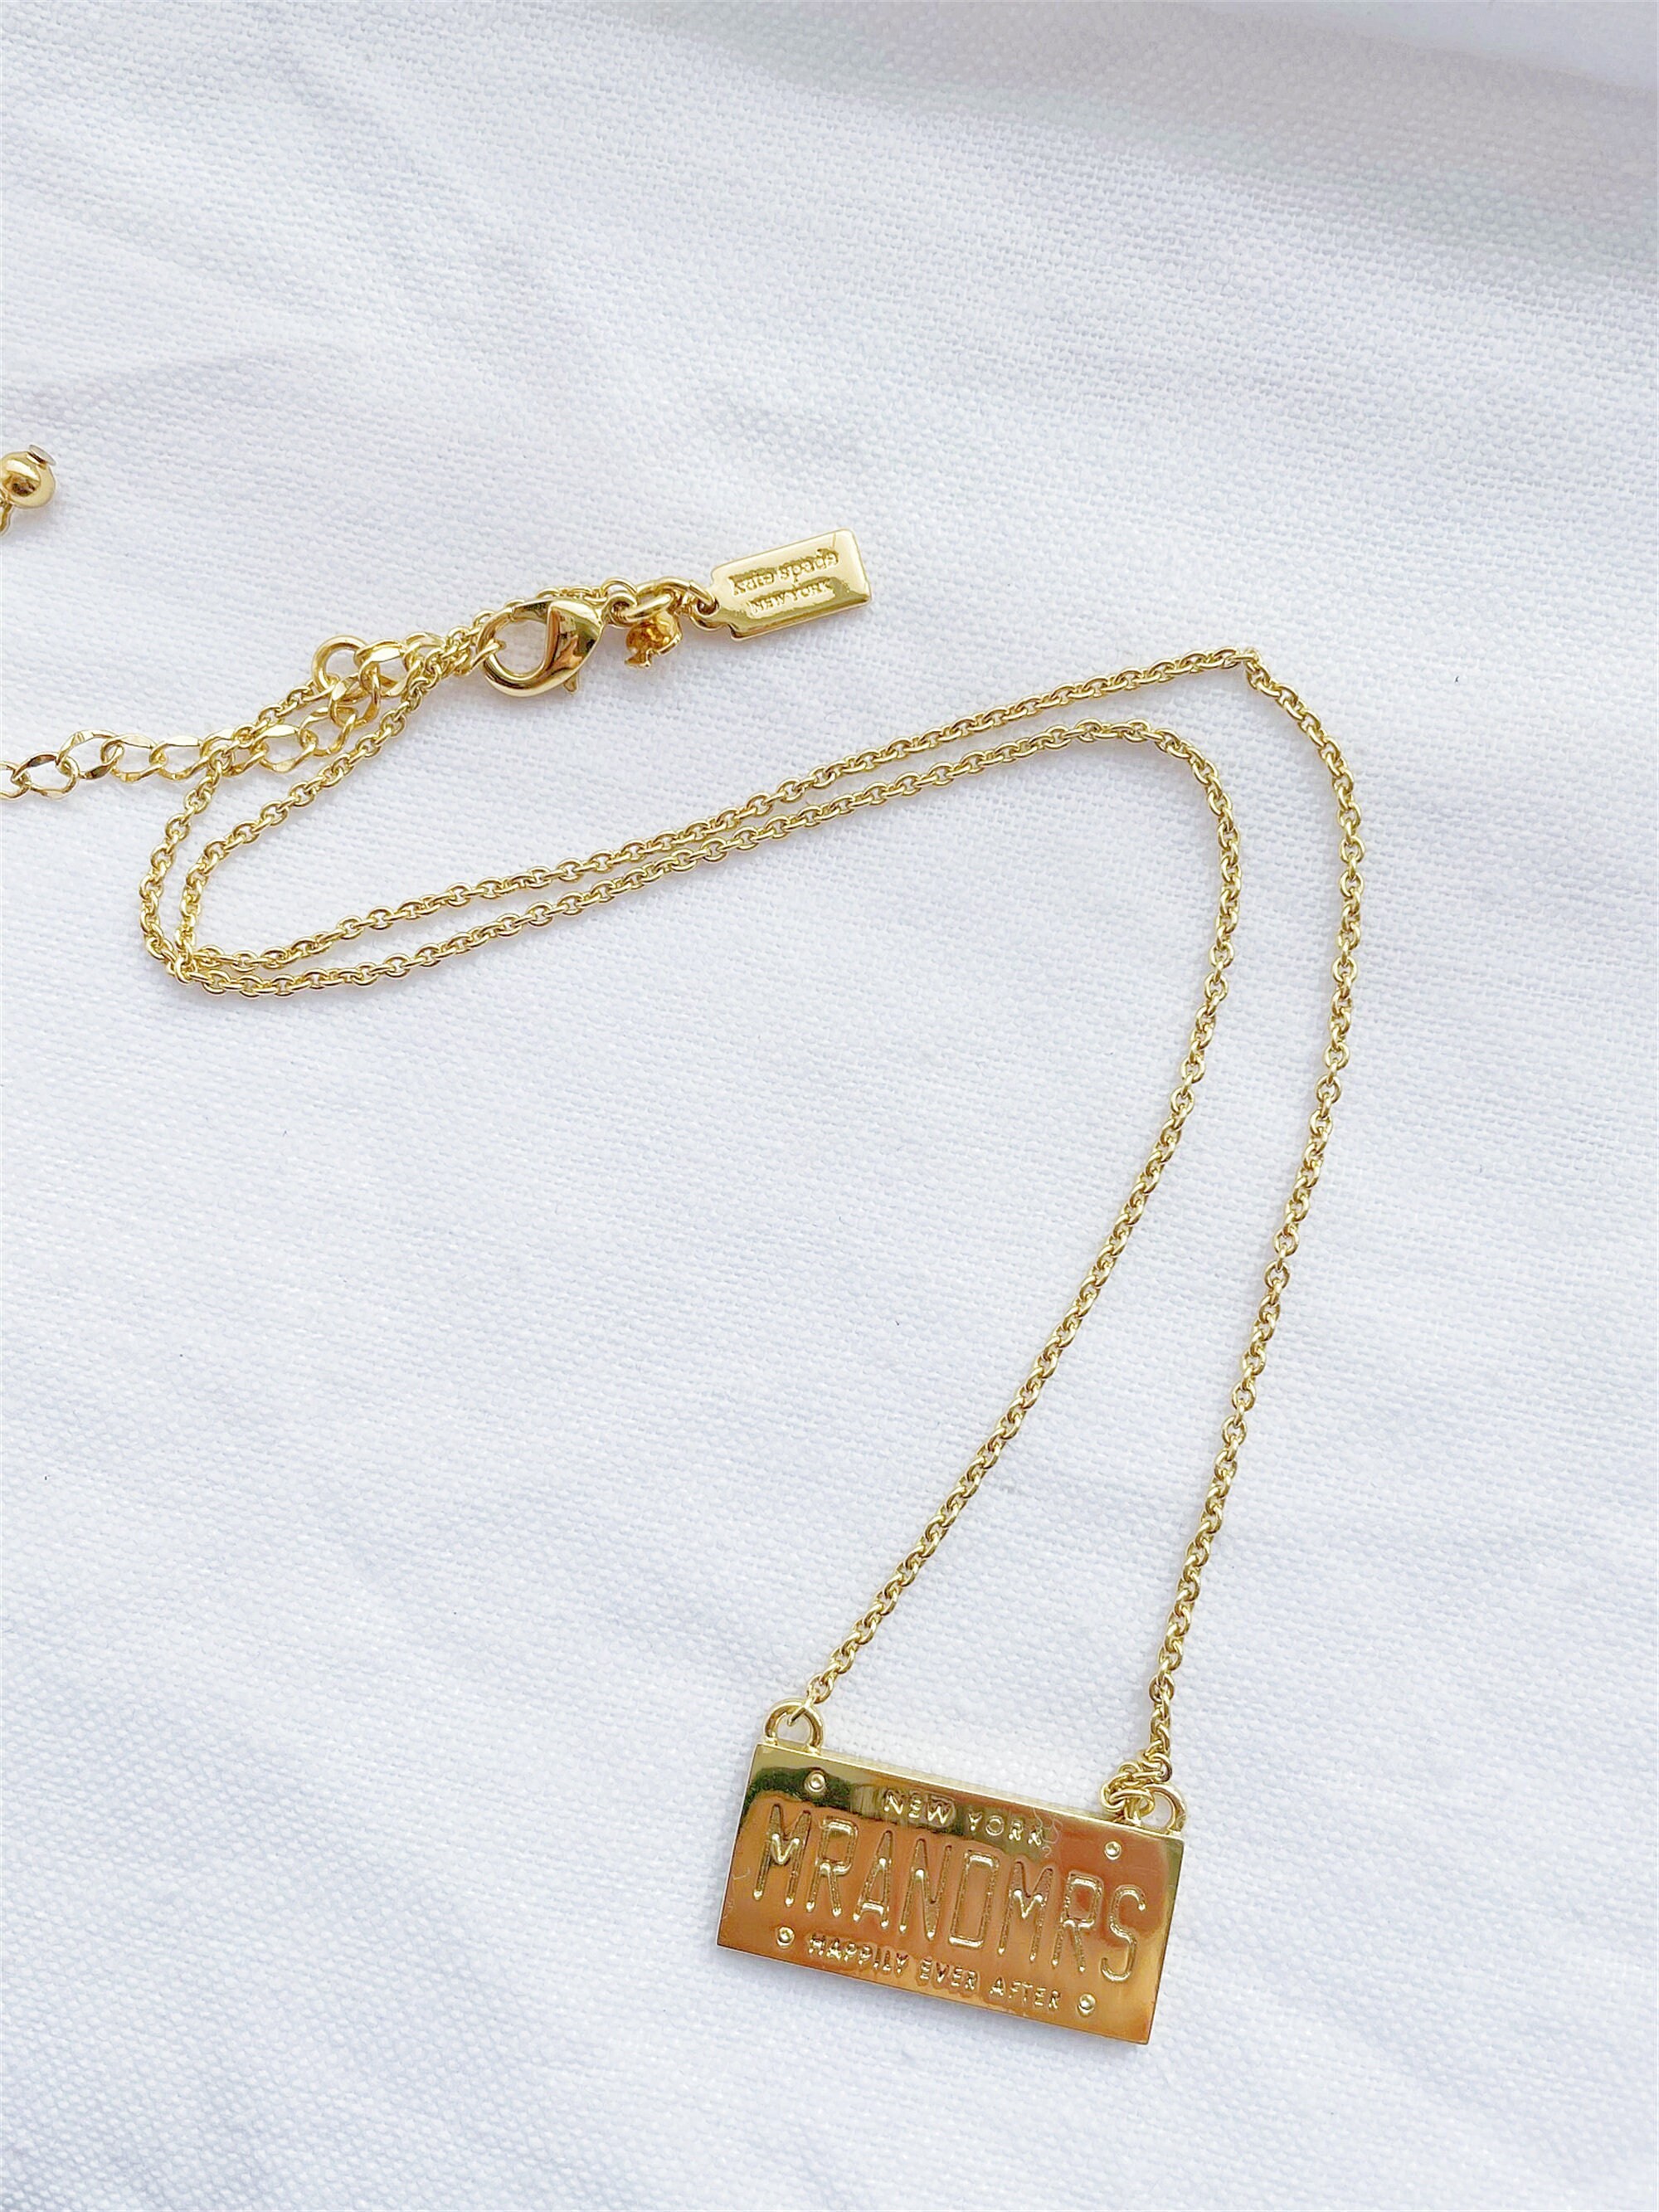 $128 Kate Spade White & Gold Chain Link Mod Moment Necklace tags &dustbag  